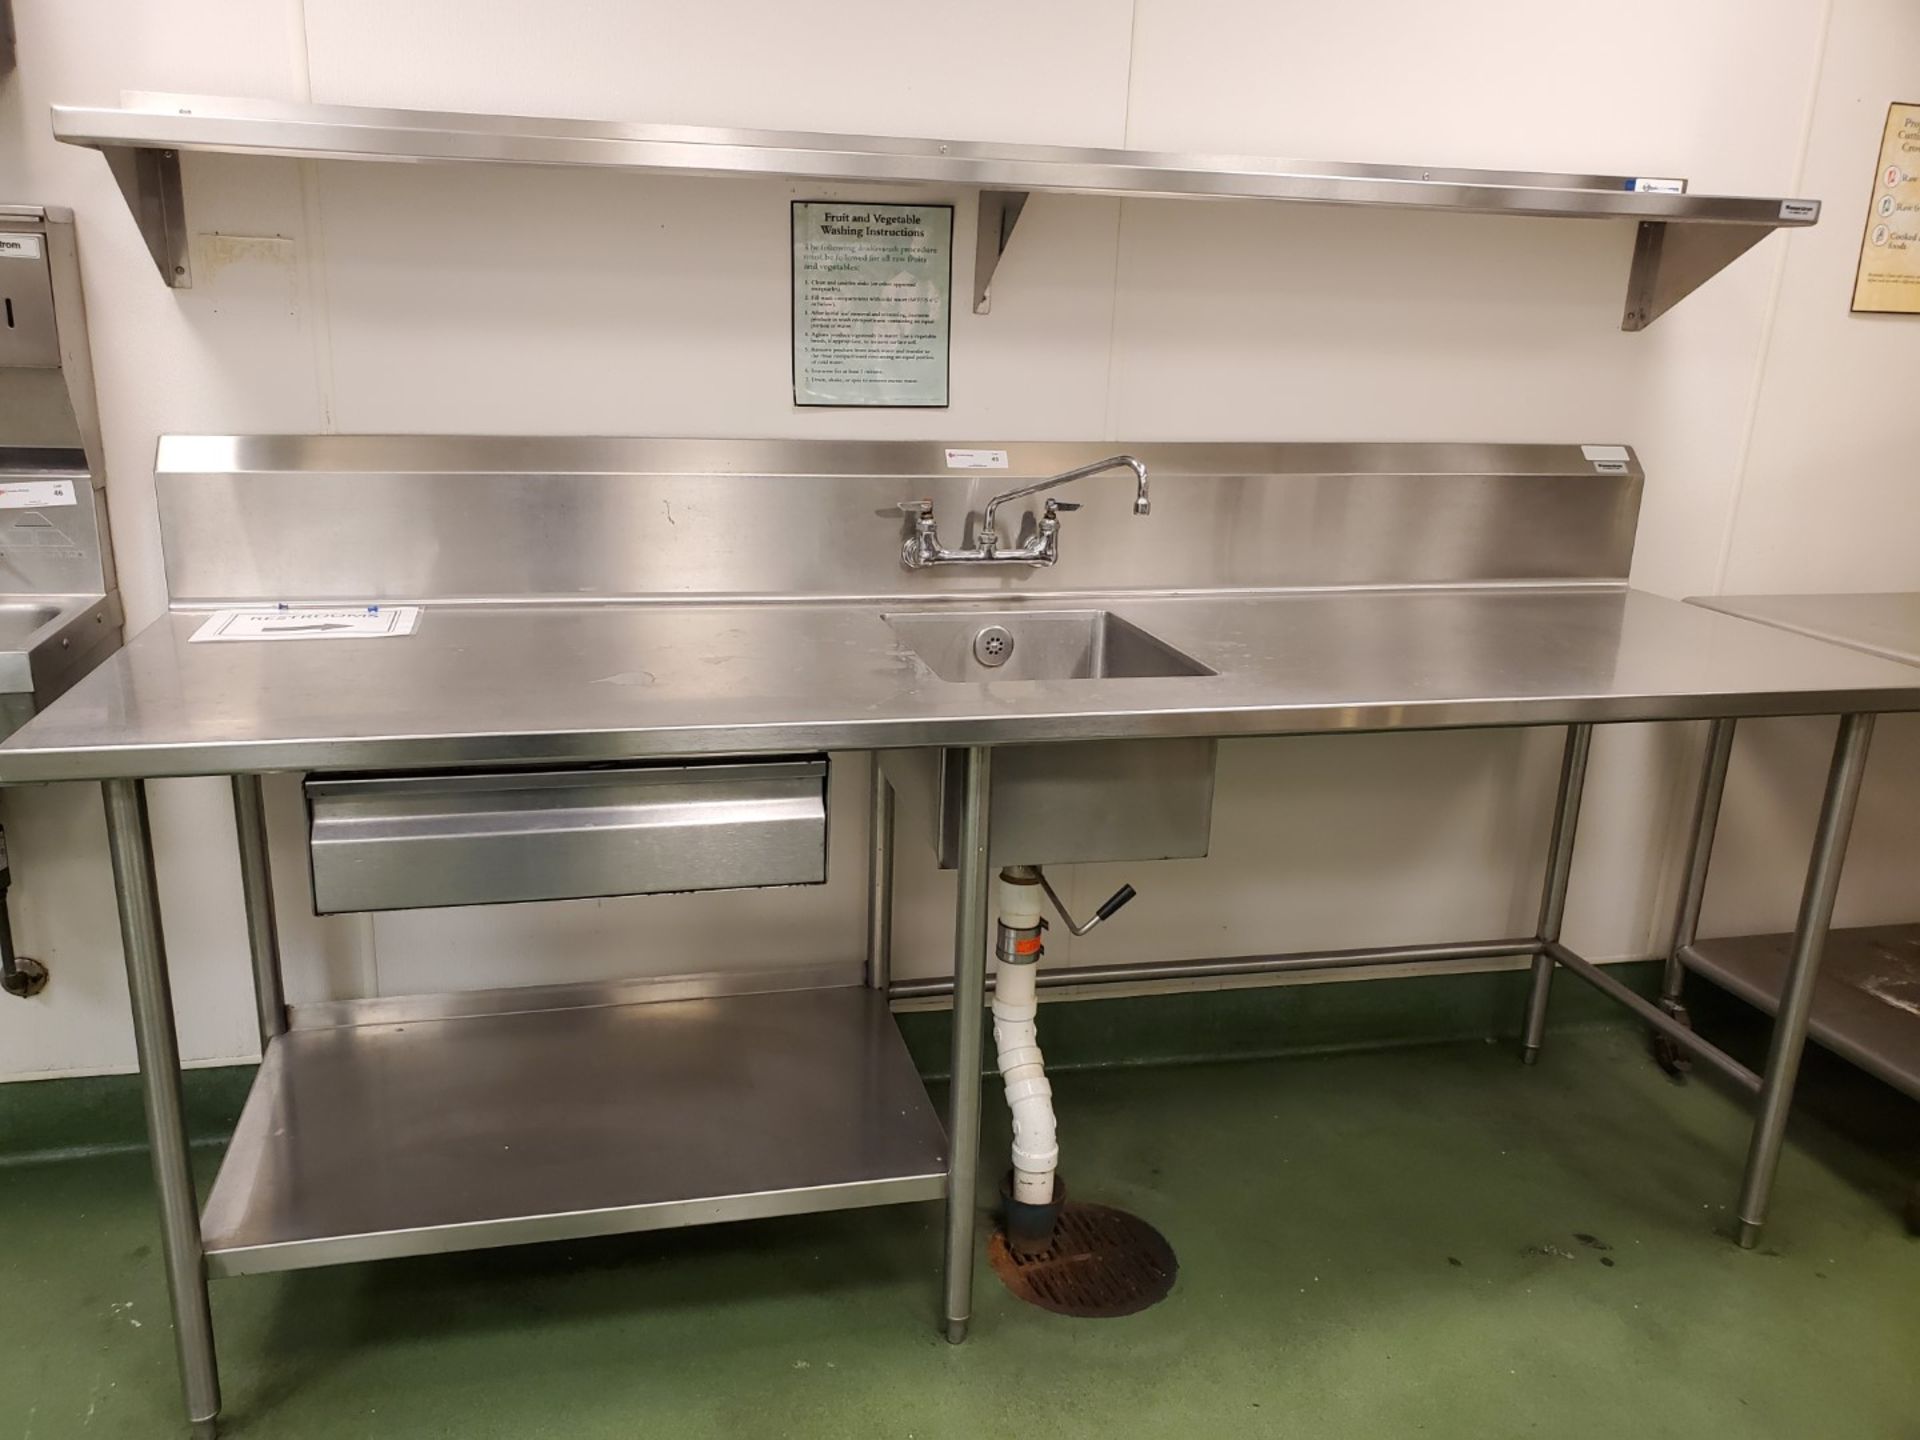 Stainless Steel counter and sink, 96" long x 28" wide x 36" high, with 15" x 18" sink